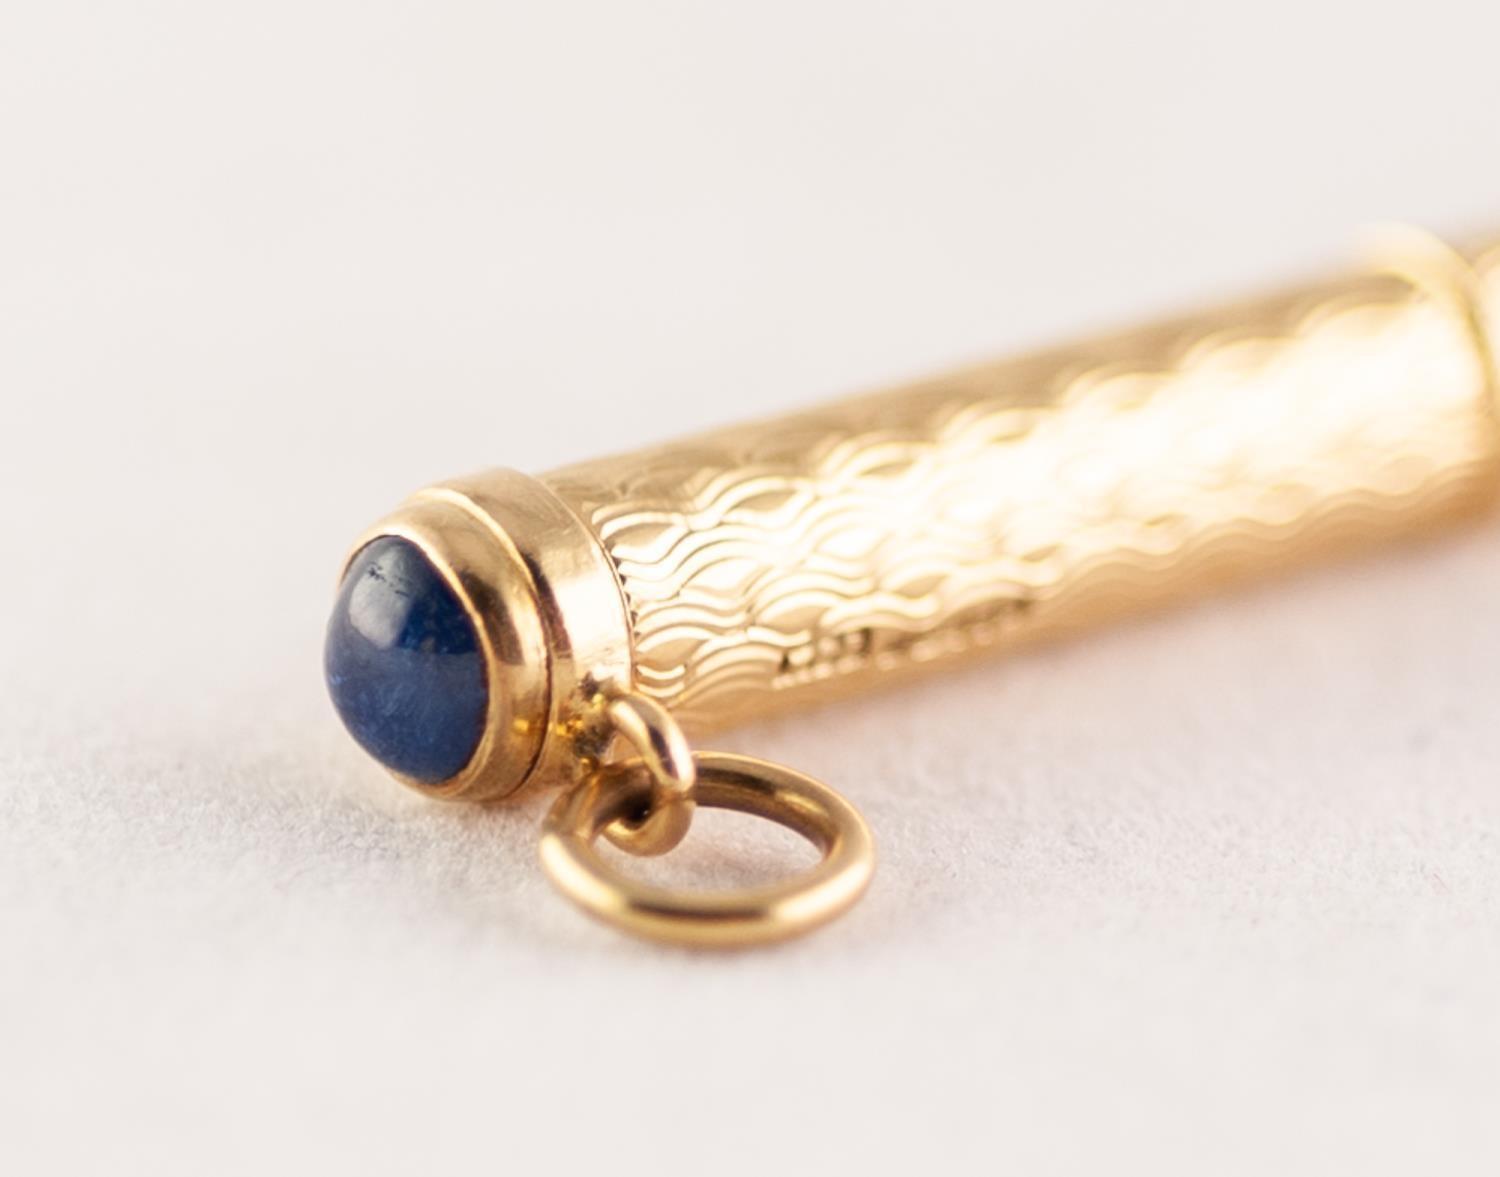 18ct GOLD TOOTHPICK, with engine turned case, the pick extending by twisting the base, with ring - Image 3 of 4